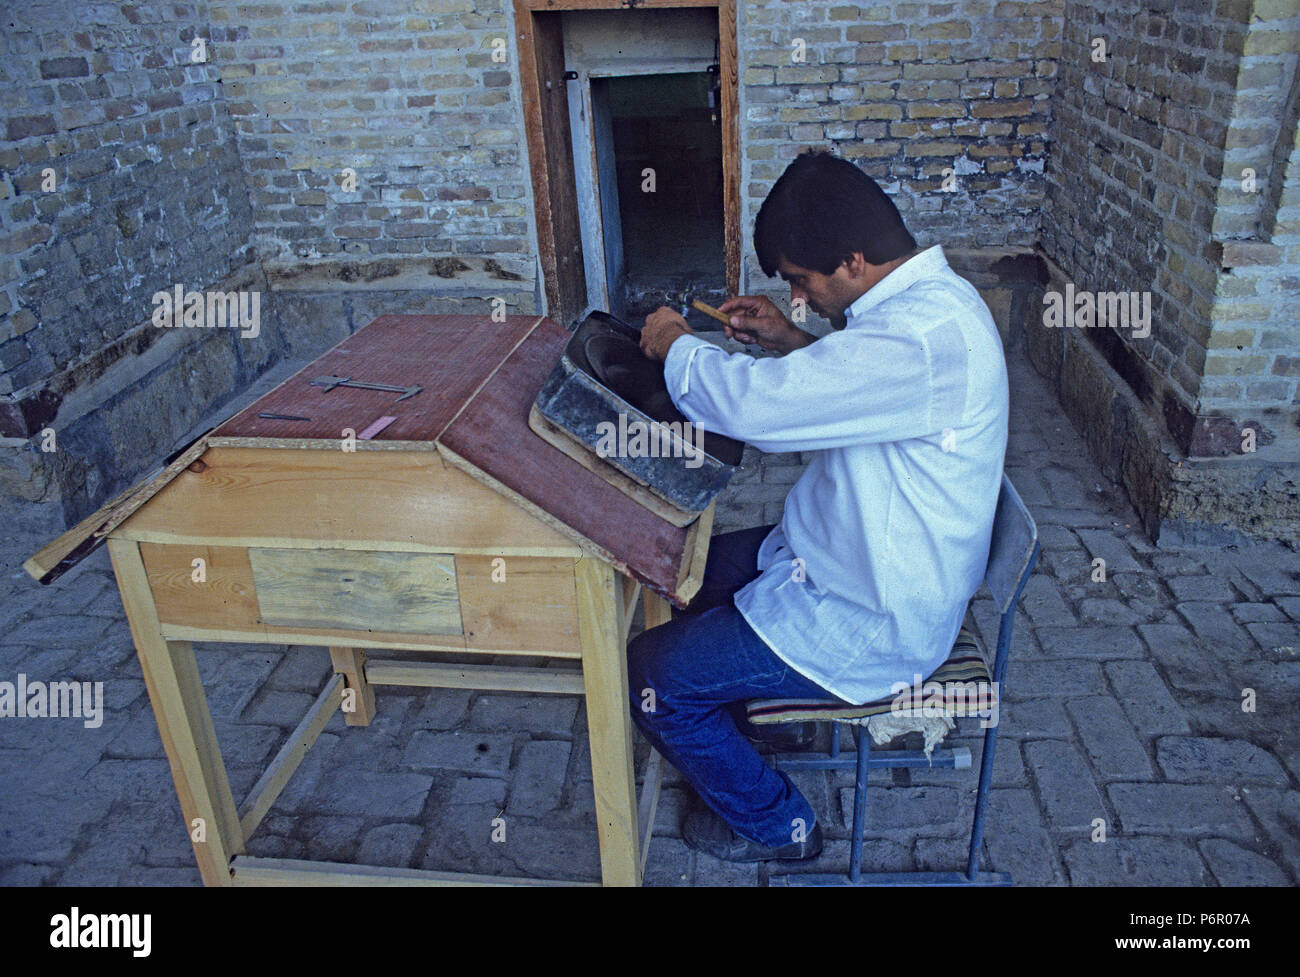 In an Islamic madrasah, a restaurateur is working on an old metal bowl, undated analogue photograph from October 1992. The historical, mostly Islamic center of Bukhara was declared a UNESCO World Heritage Site in 1993, and the state of Uzbekistan gained its independence after the collapse of the Soviet Union on 01.09.1991. Photo: Matthias Toedt/dpa central image/ZB/picture alliance | usage worldwide Stock Photo